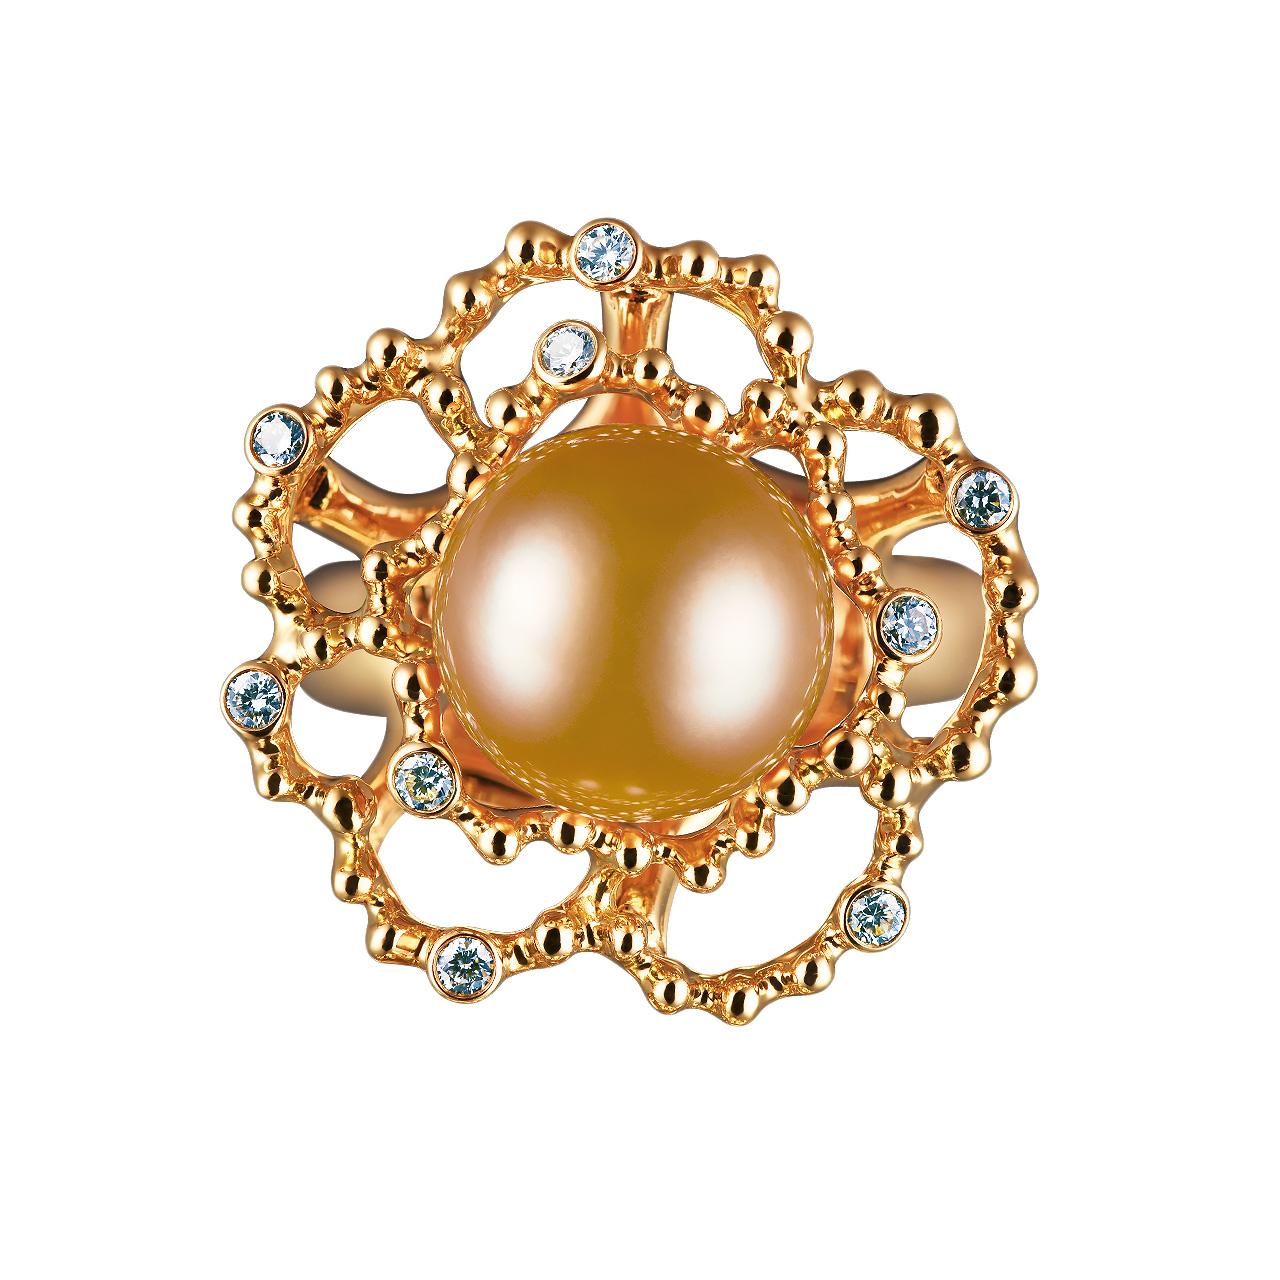 - 10 Round Diamonds - 0,13 ct, G/VVS
- 9,5 mm Golden South Sea pearl 
- 18K Yellow Gold 
- Weight: 10,82 g
- Size: 17 mm
This elegant ring from the Byzantium collection is adorned with a lustrous golden pearl of the South Sea surrounded by diamonds